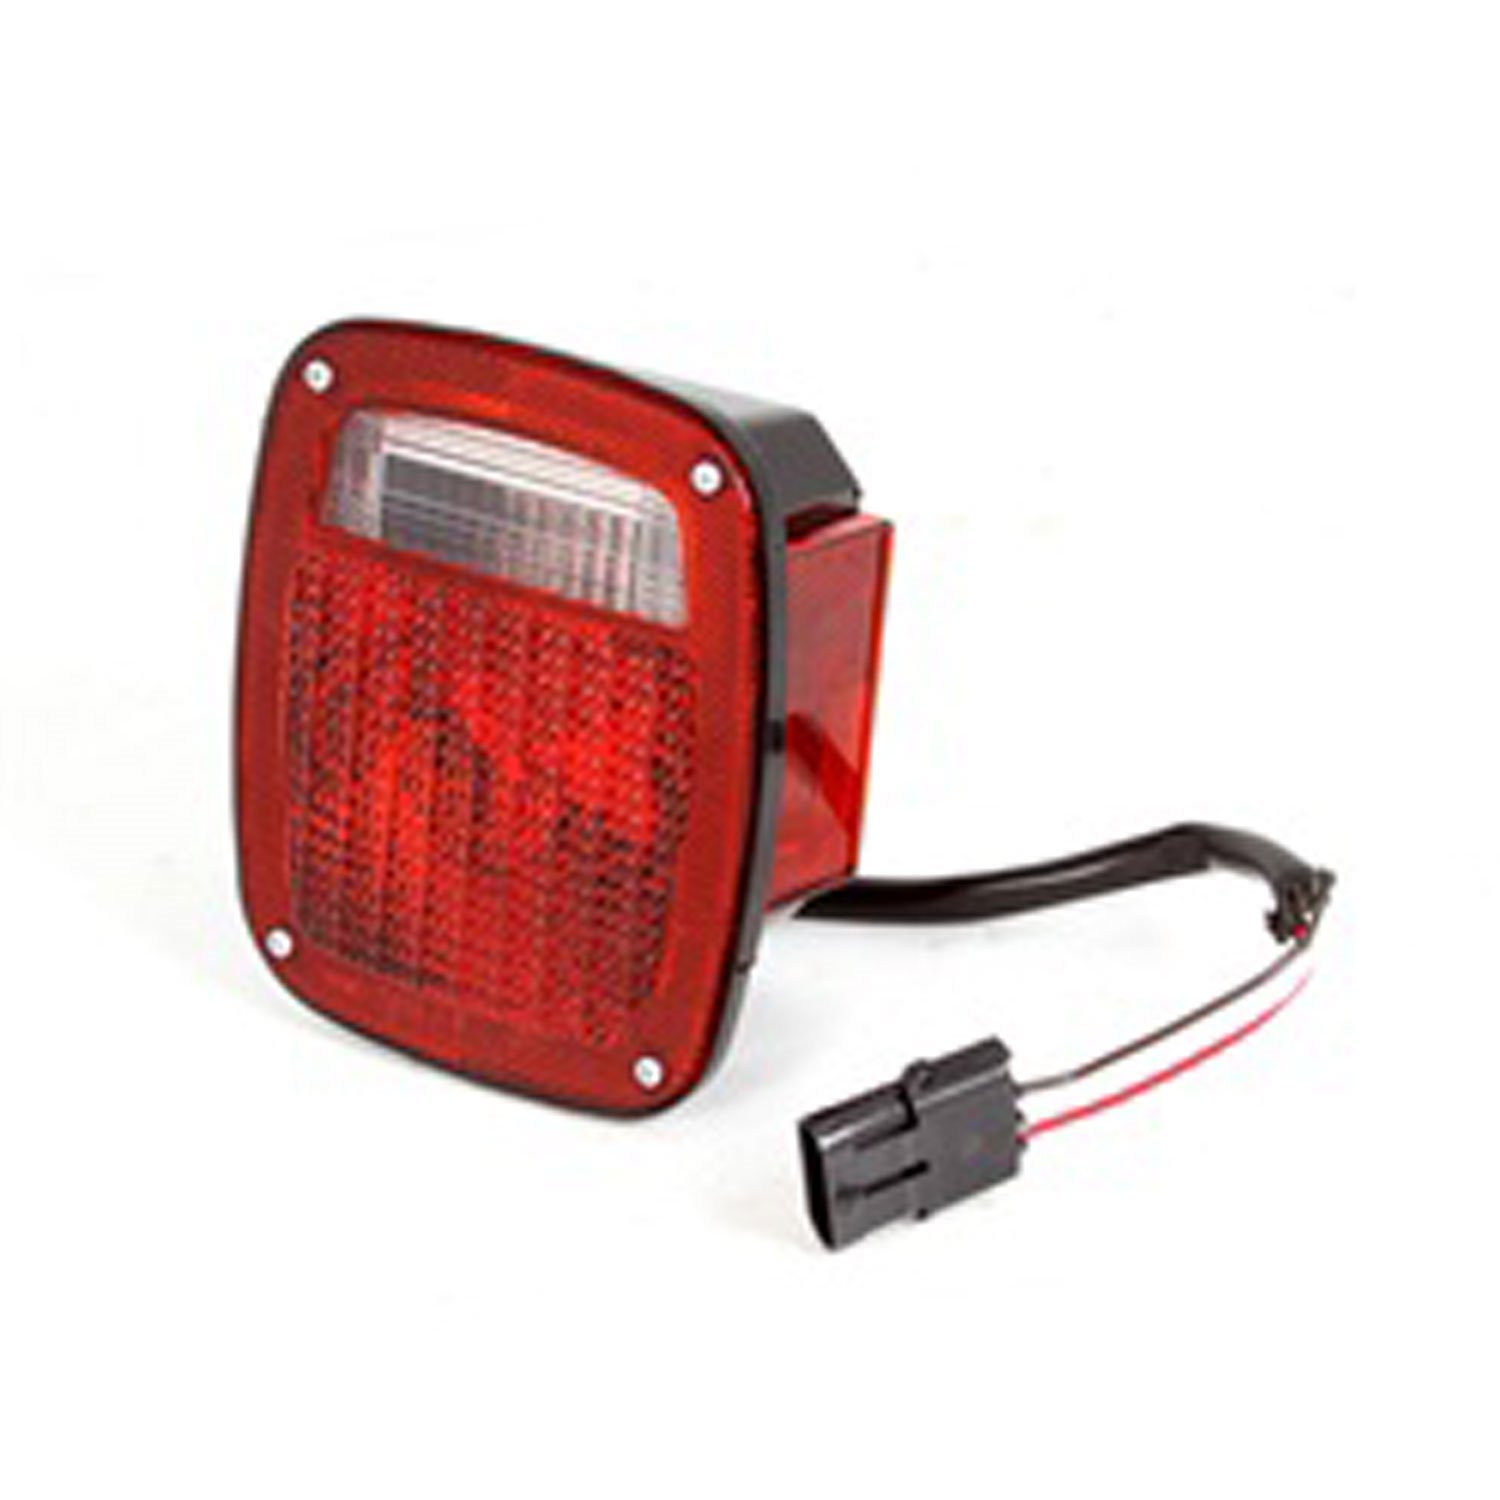 Replacement tail light assembly from Omix-ADA, Fits right side of 91-97 Jeep Wrangler